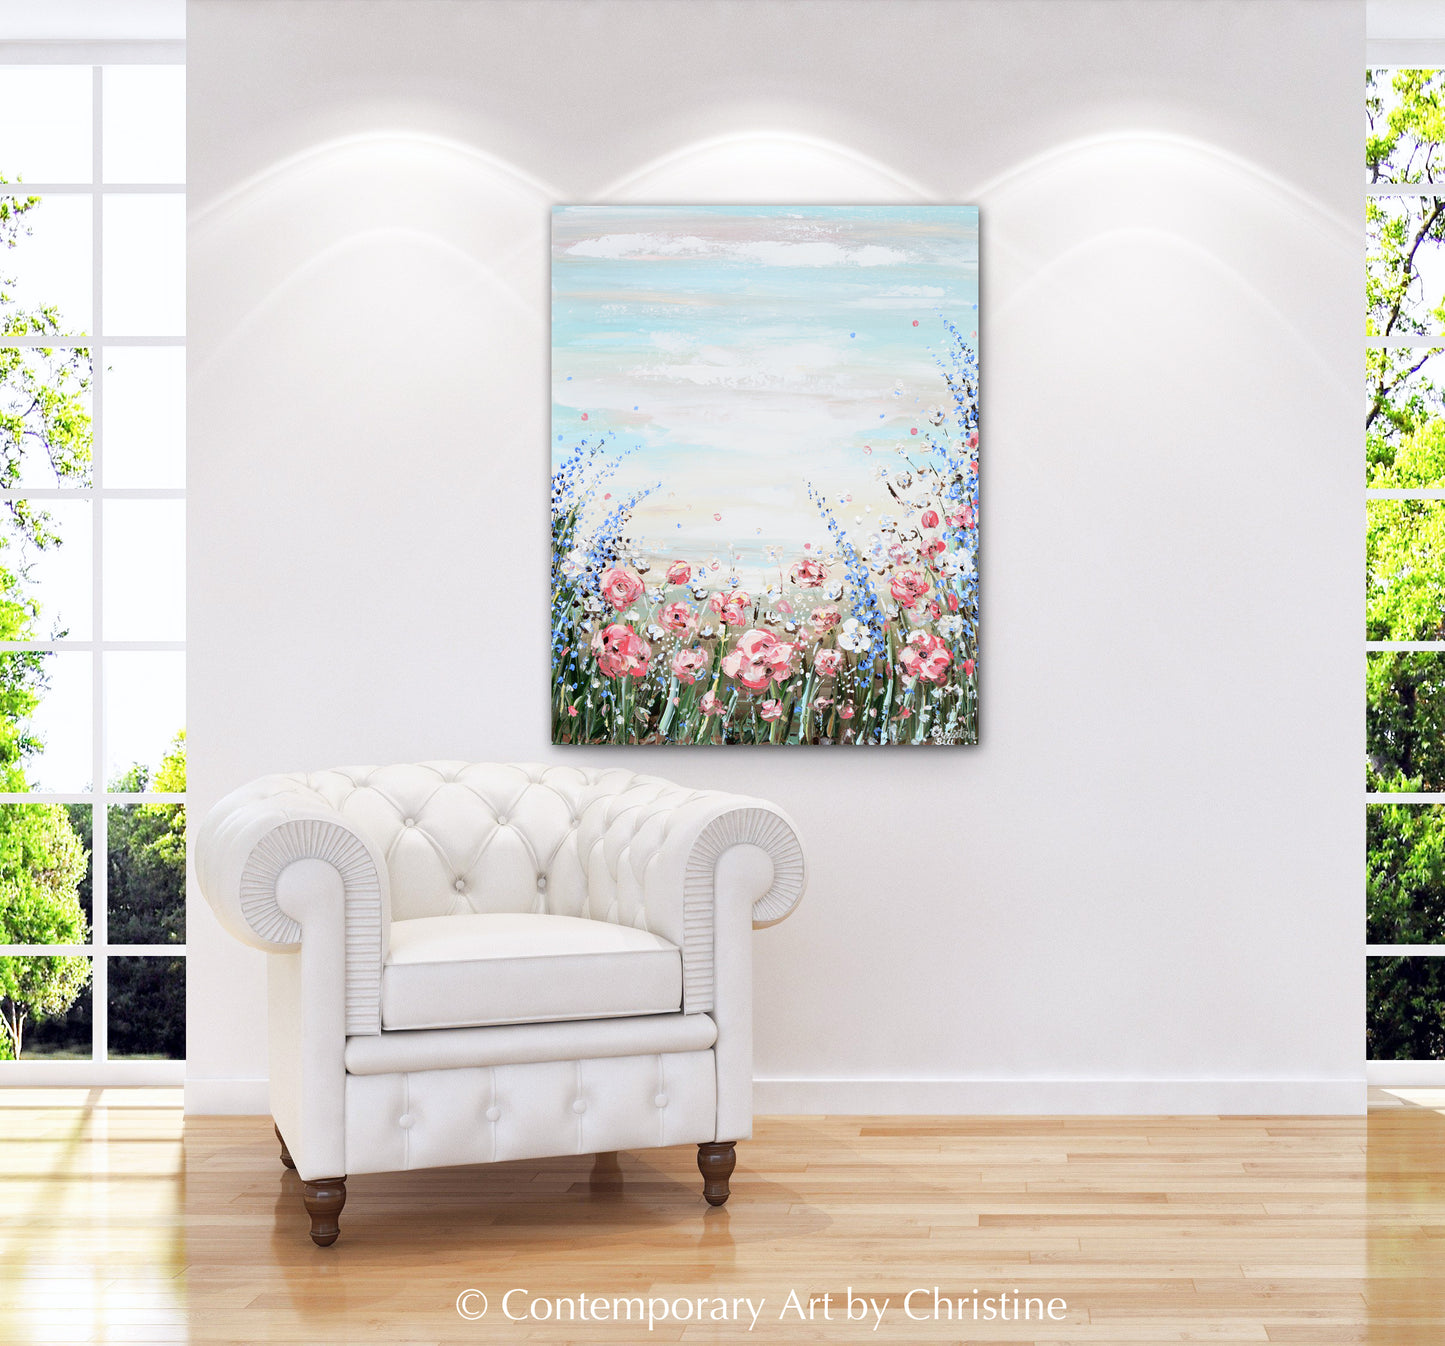 "Found Hope" ORIGINAL Art Abstract Floral Wildflowers Painting Textured Landscape 24x30"